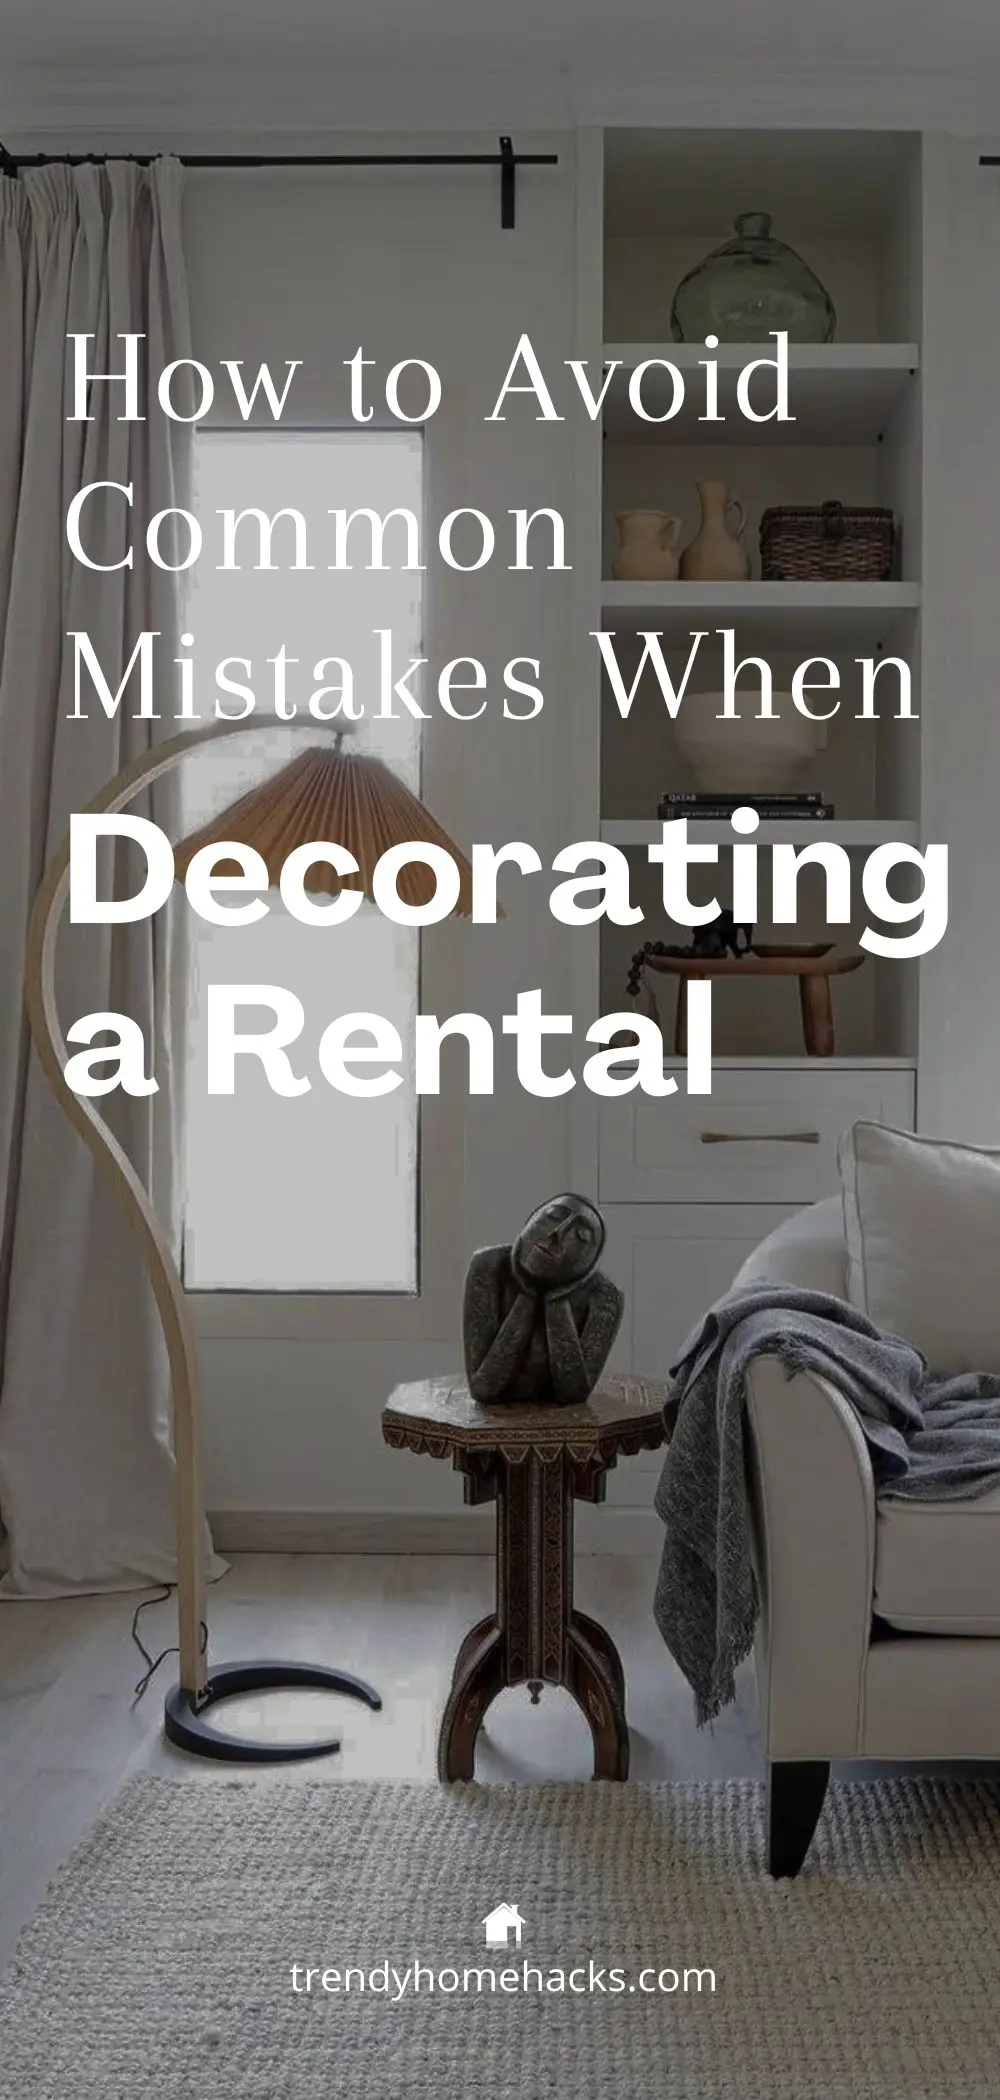 a Pinterest pin with a dark background and text overlay "How to avoid common mistakes when decorating a rental".